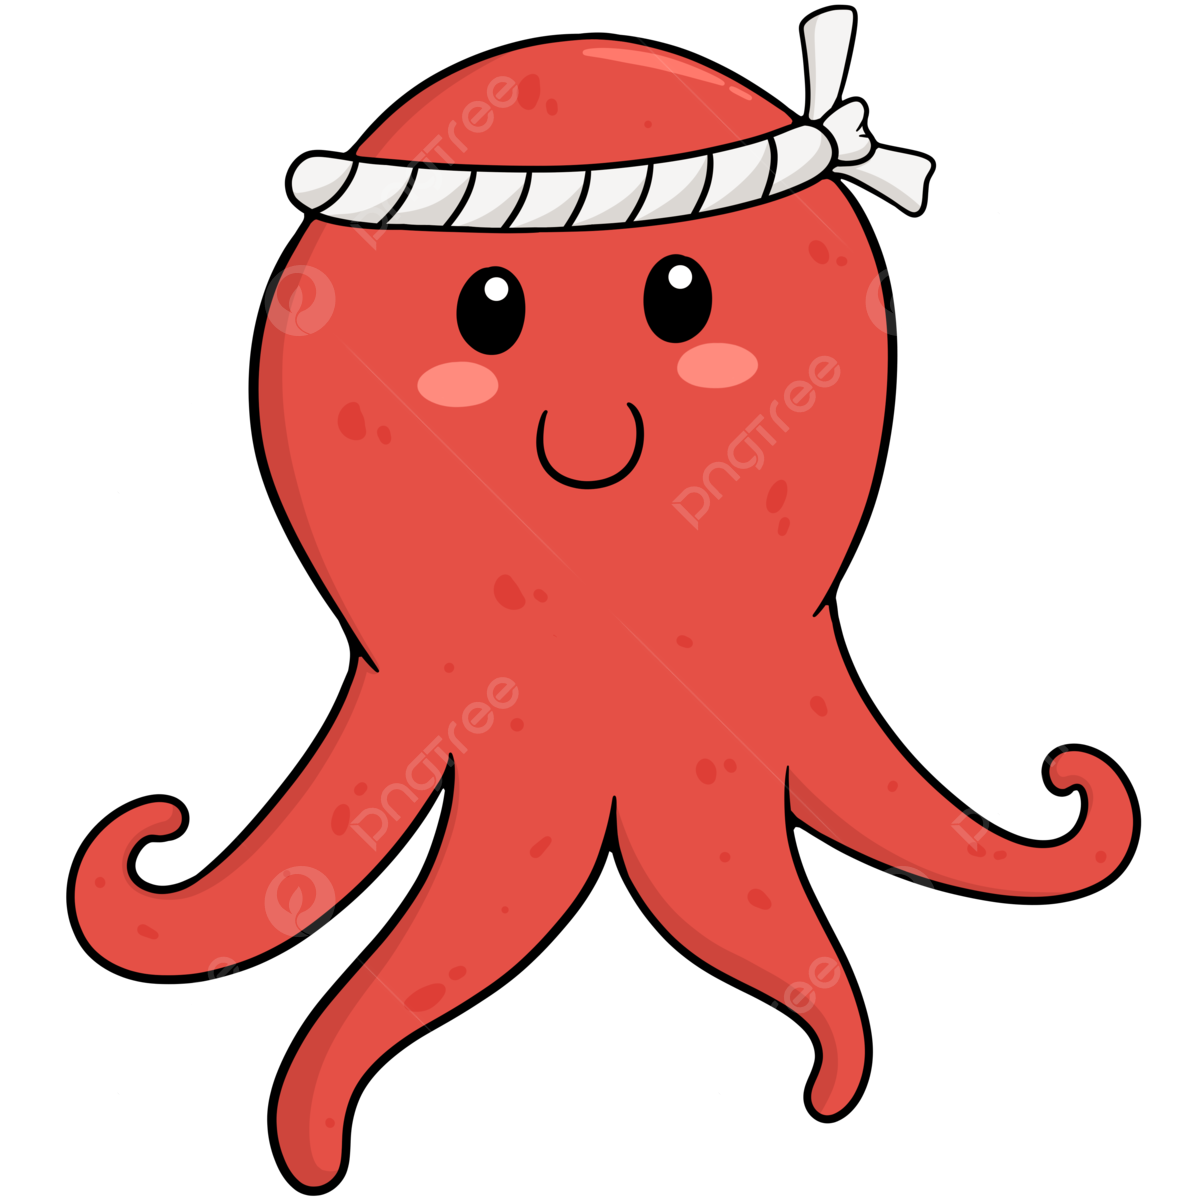 Kawaii octopus octopus kawaii octopus cartoon cute octopus png transparent clipart image and psd file for free download